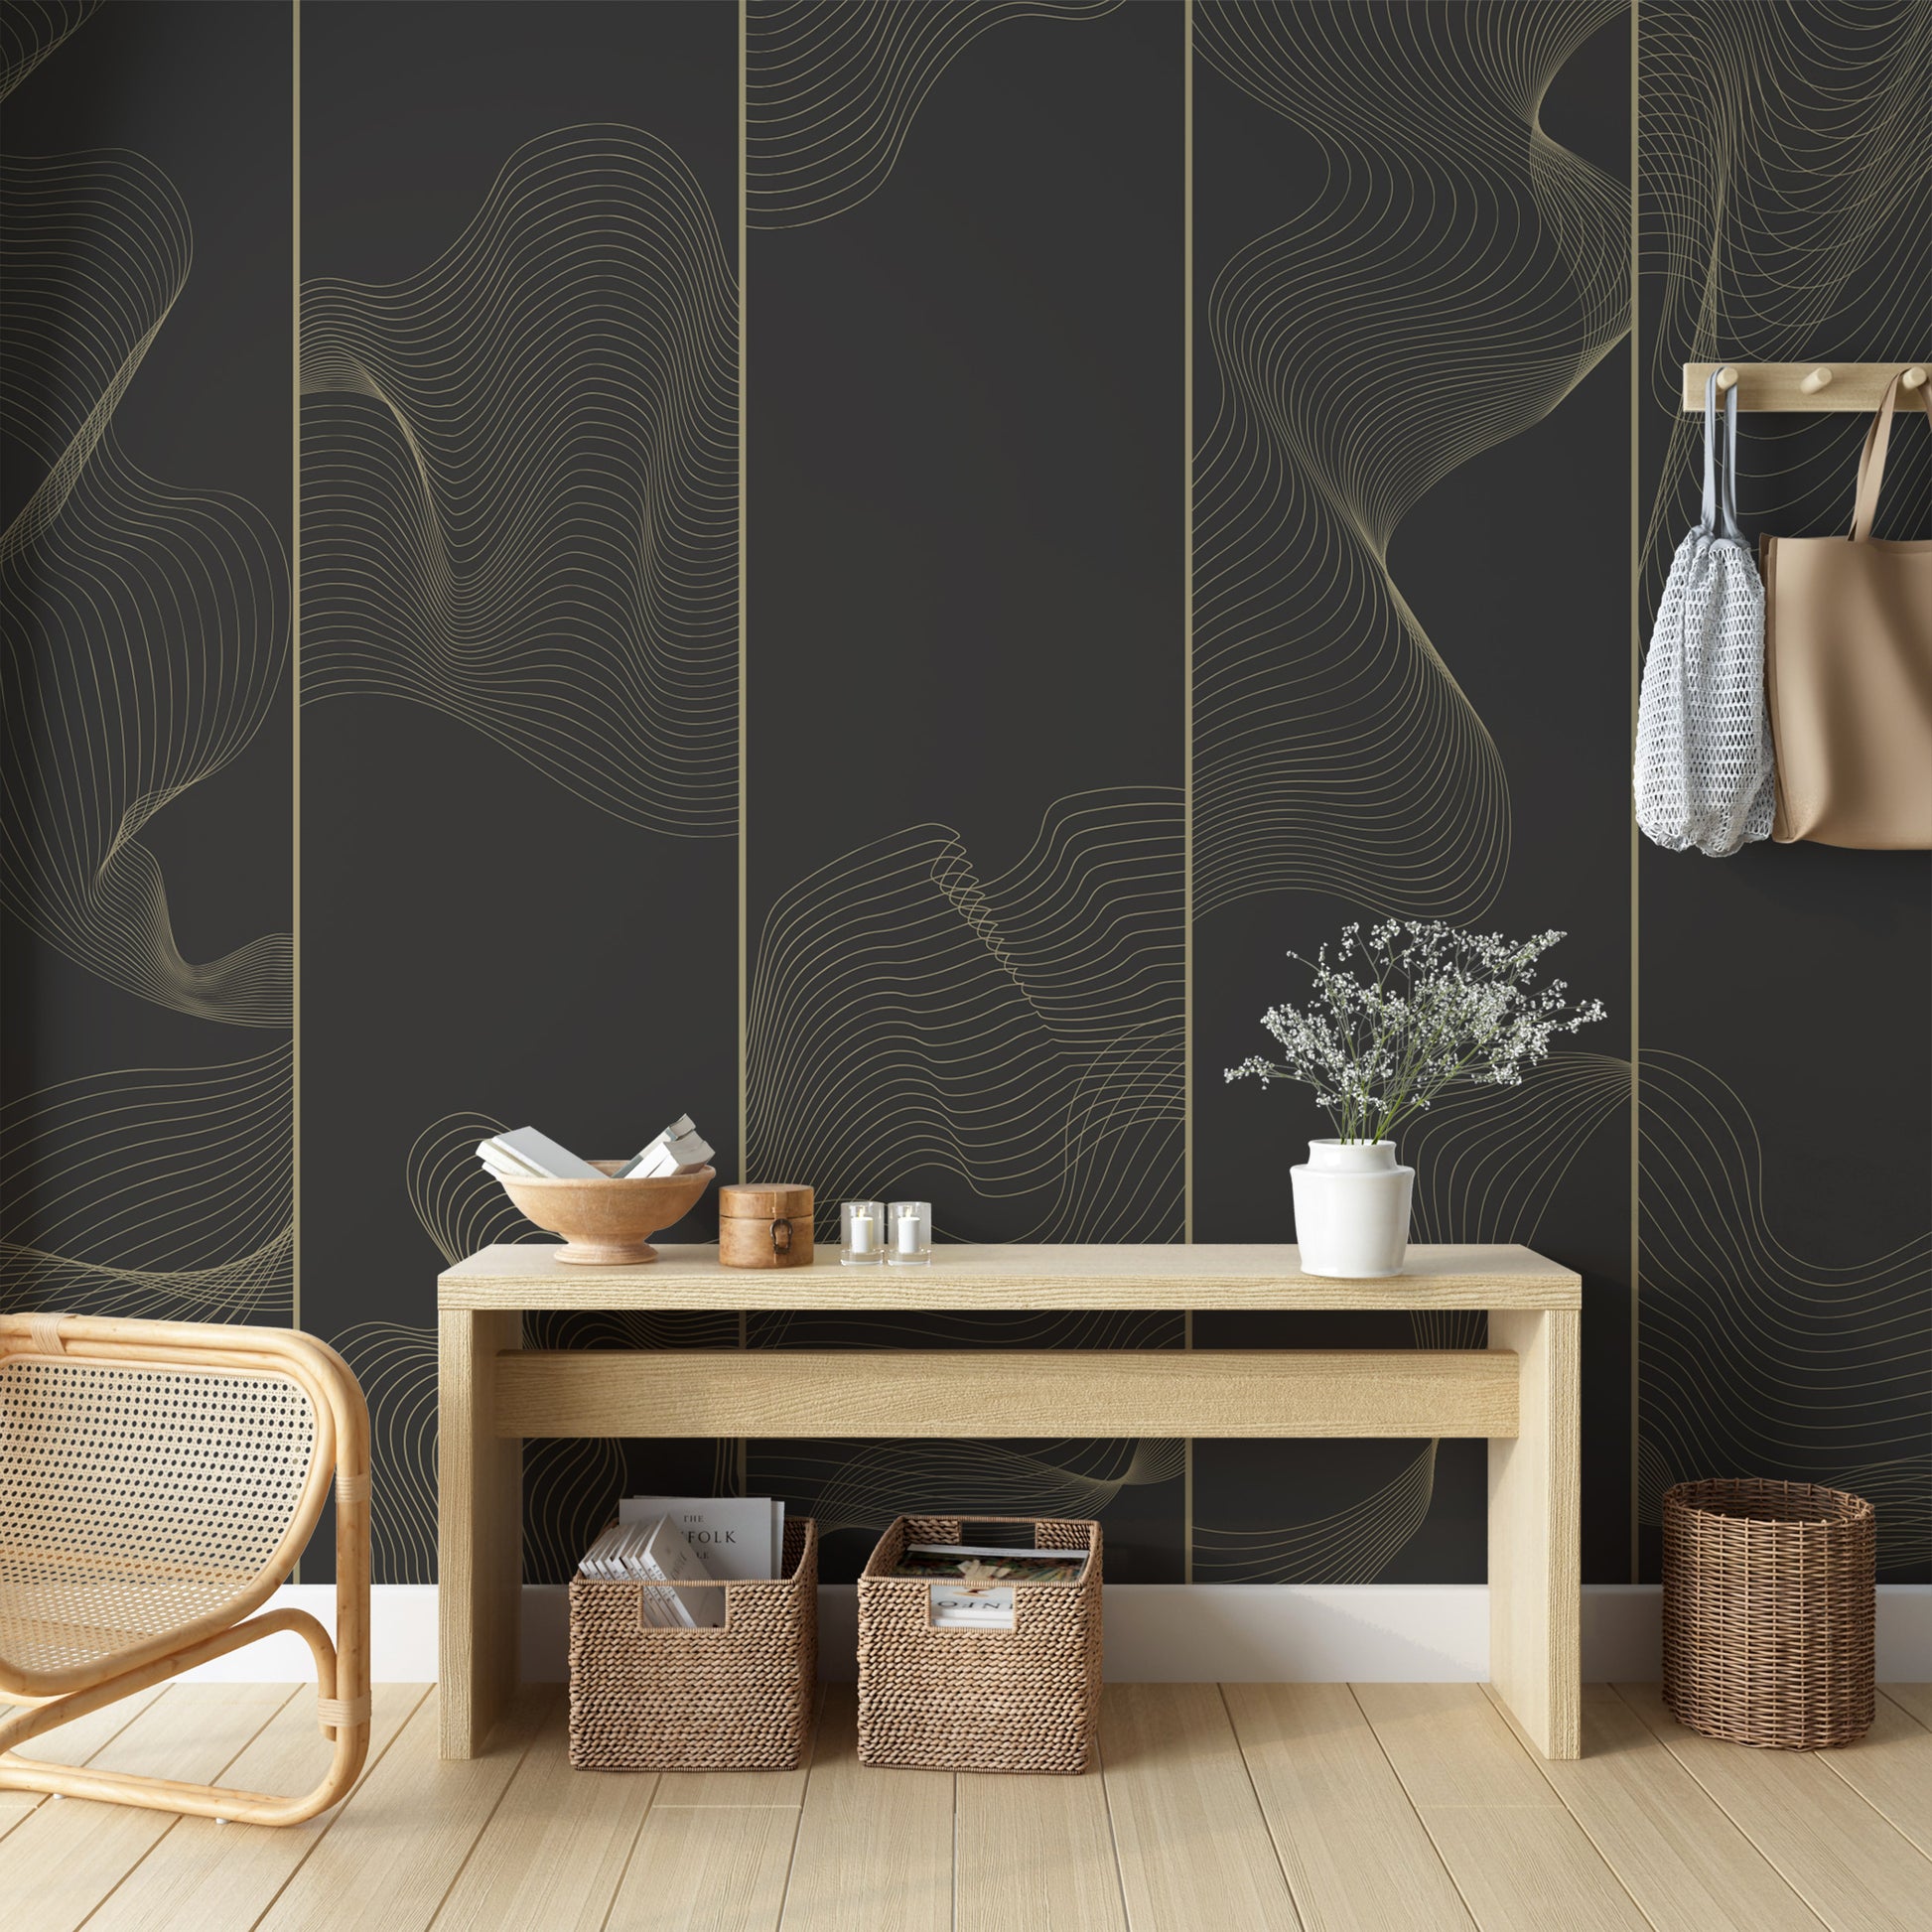 Removable Wall Mural featuring Abstract Gold Lines for Stylish Interior Design